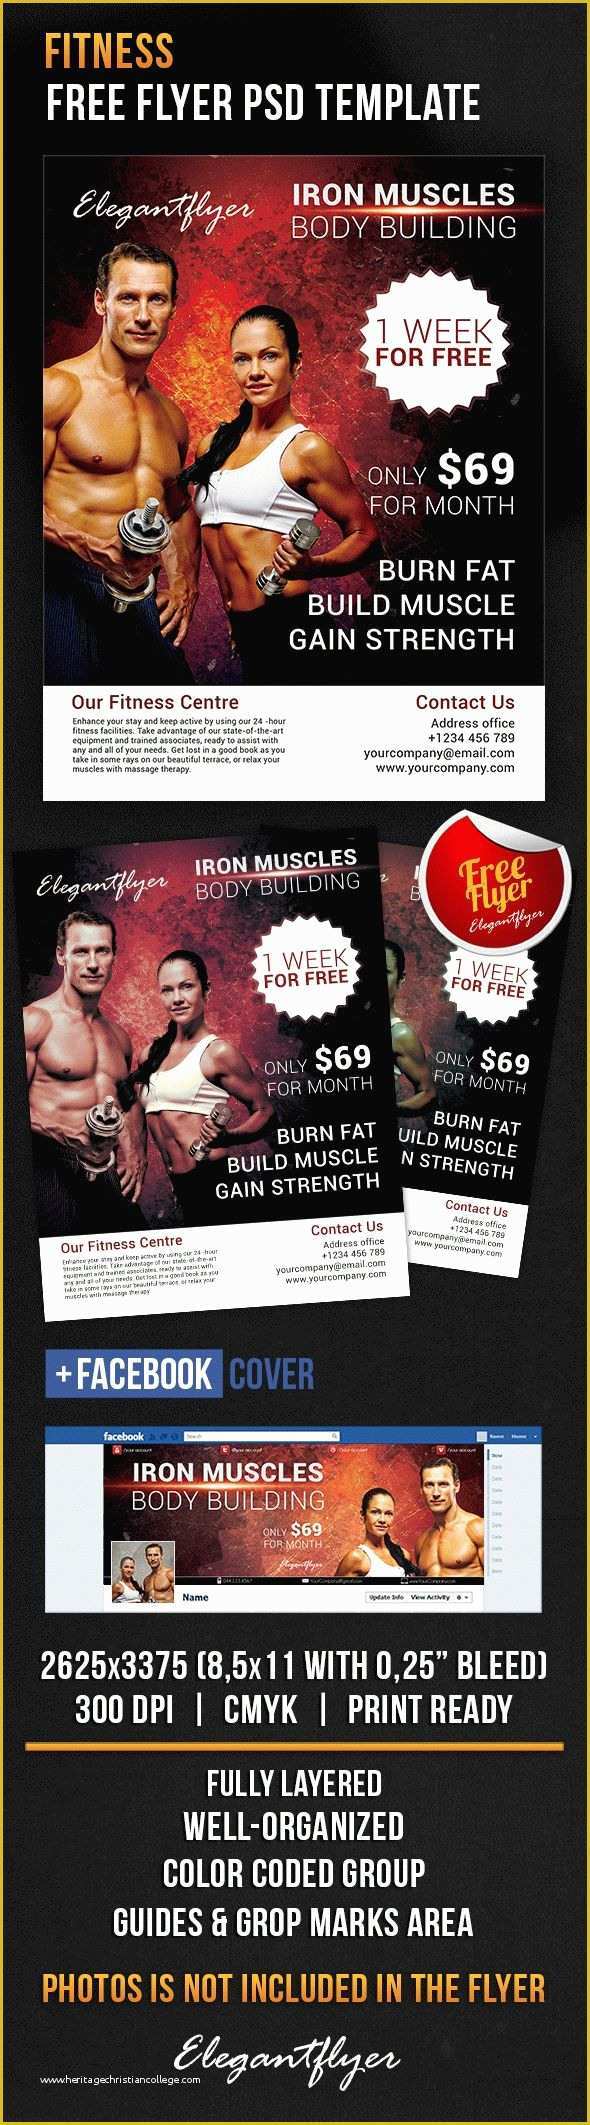 Gym Flyer Template Free Of Fitness Flyer – Free Psd Flyer Template – by Elegantflyer